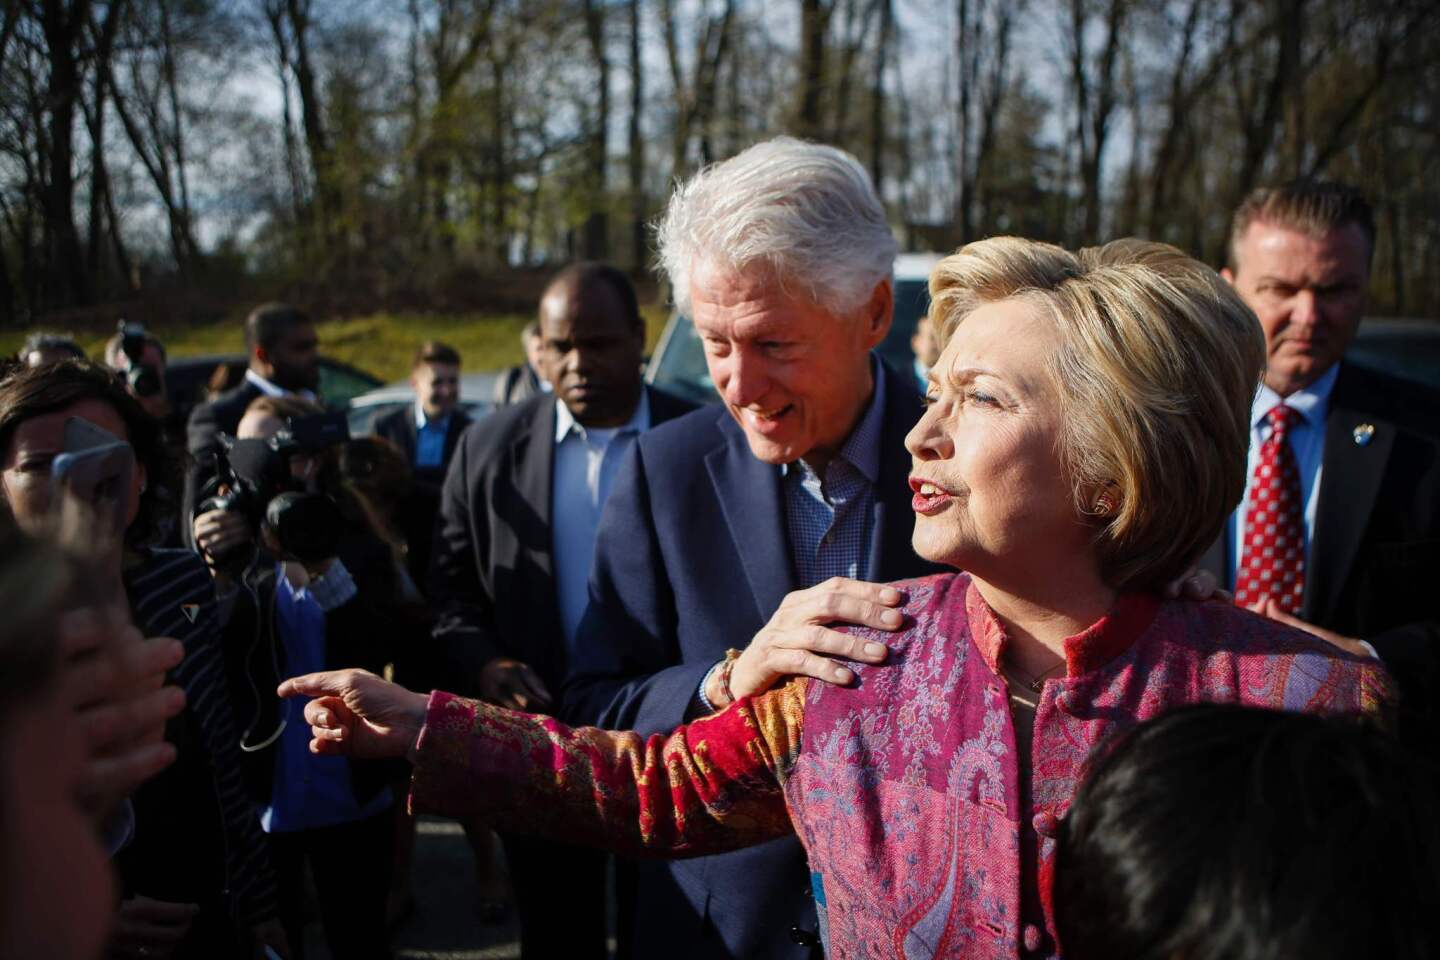 Democratic presidential candidate Hillary Clinton and her husband, former President Bill Clinton, greet supporters after casting their ballots at a polling station in Chappaqua, N.Y.